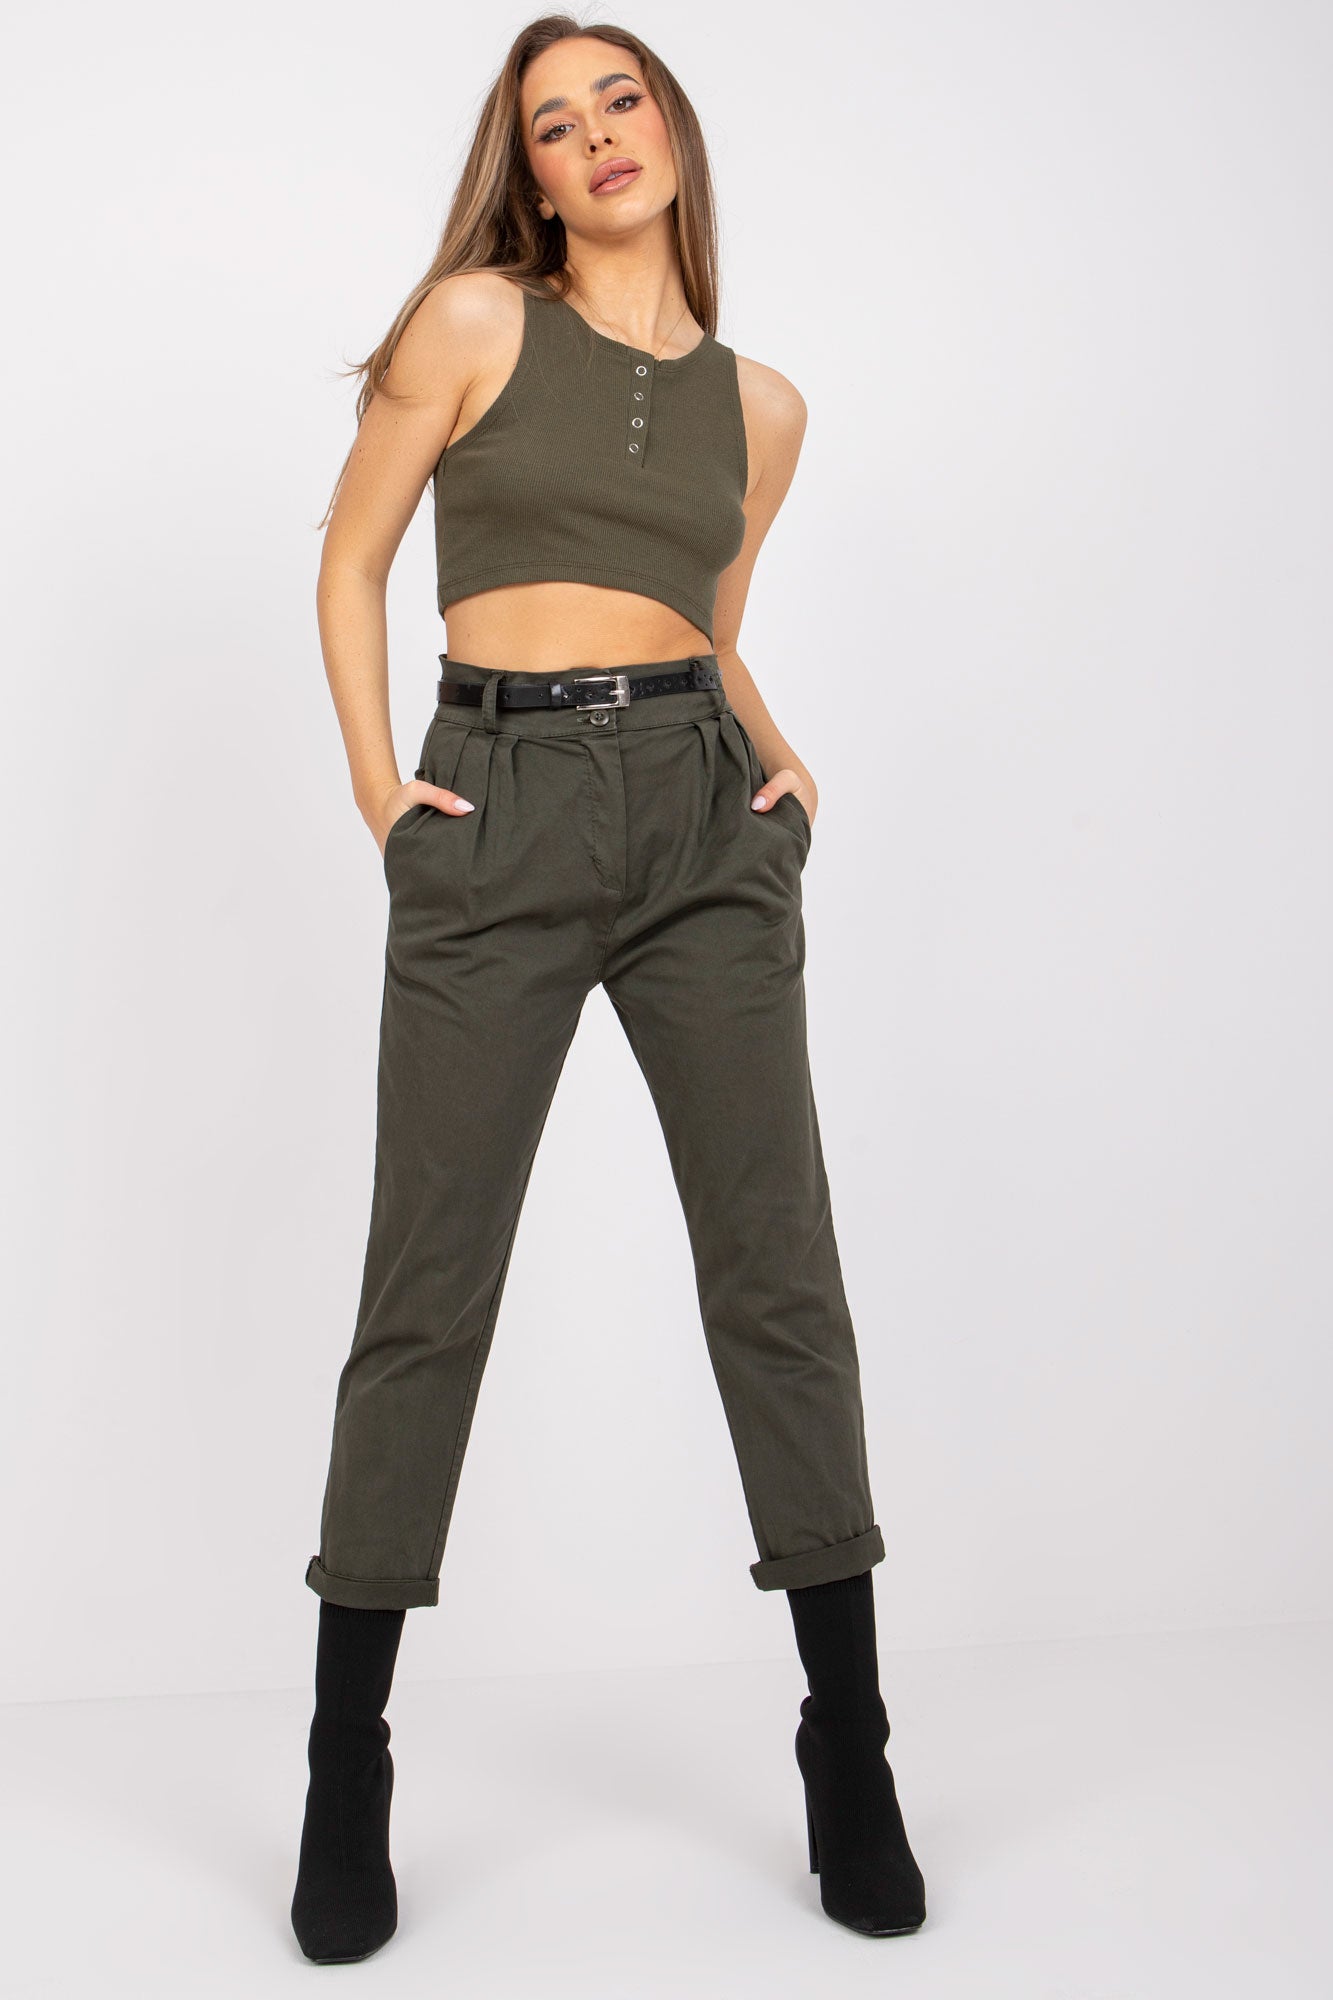 Discover timeless style with our Khaki Pleated Trousers with Belt. These trousers offer a classic pleated design and include a coordinating belt for a personalized fit. With trendy turned-up cuffs, they blend classic and contemporary fashion seamlessly. Upgrade your wardrobe with this versatile choice today.